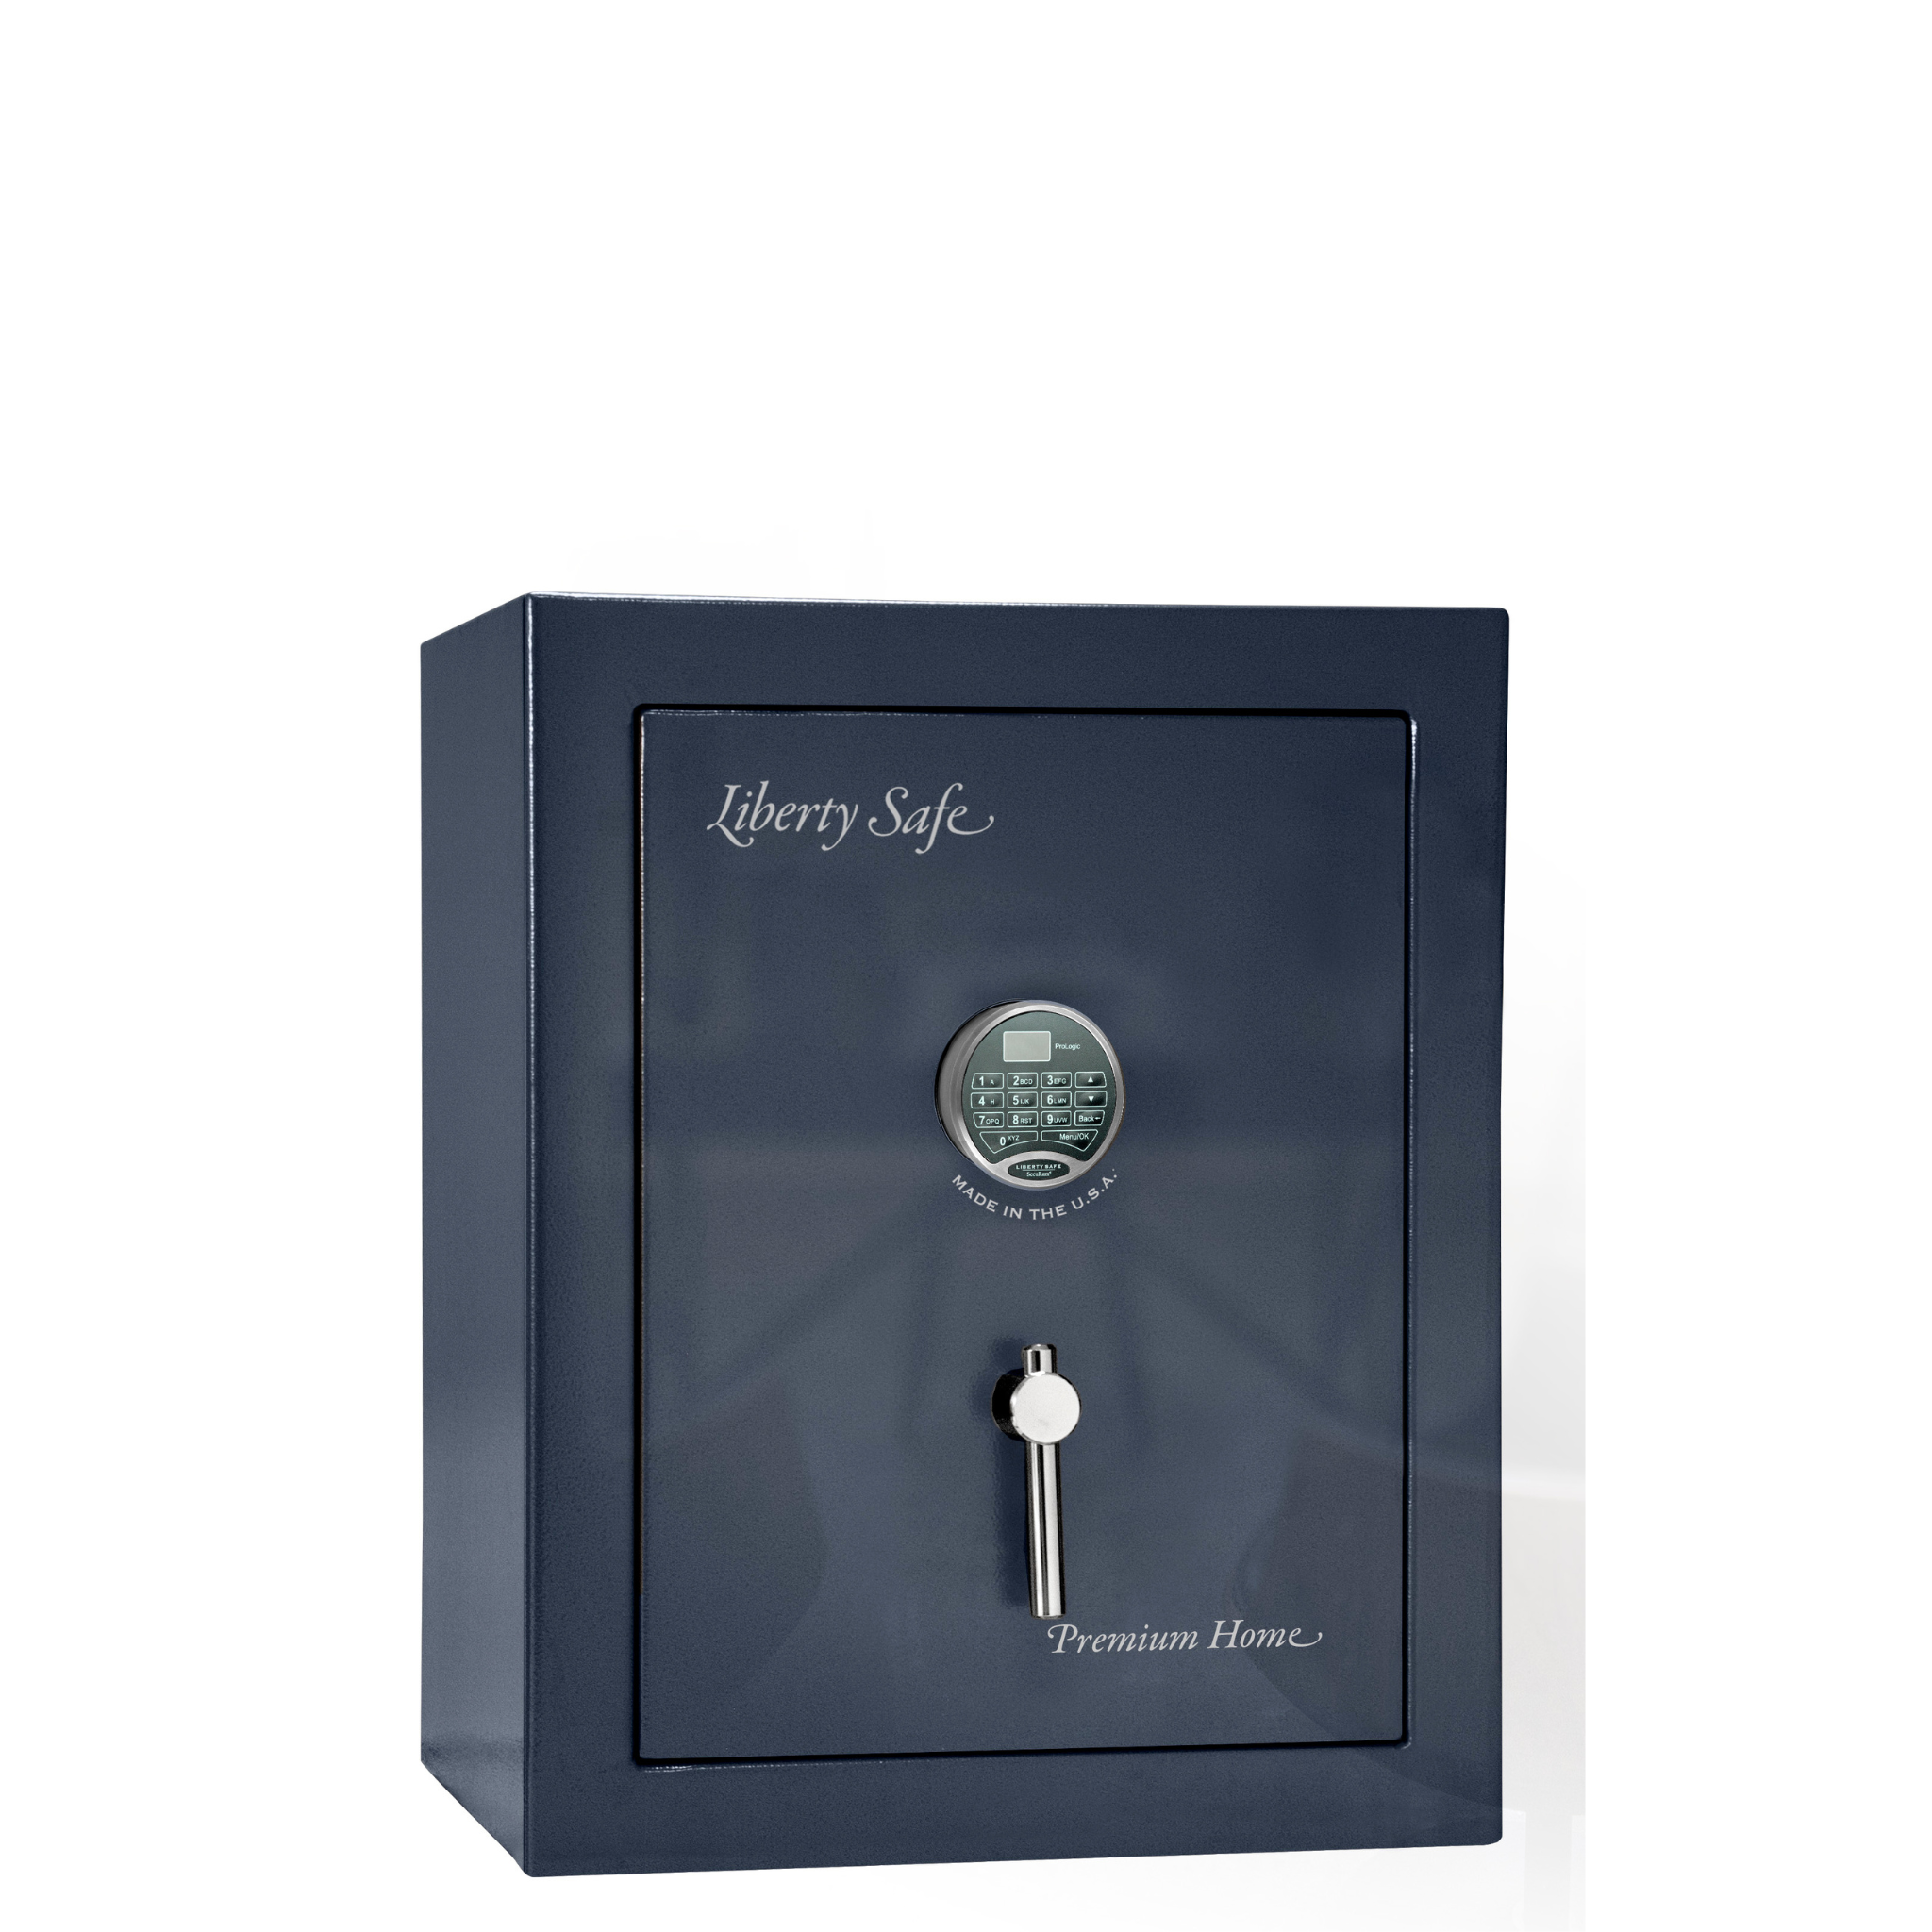 Premium Home Series | Level 7 Security | 2 Hour Fire Protection | 08 | Dimensions: 29.75"(H) x 24.5"(W) x 19"(D) | Blue Gloss - Closed Door